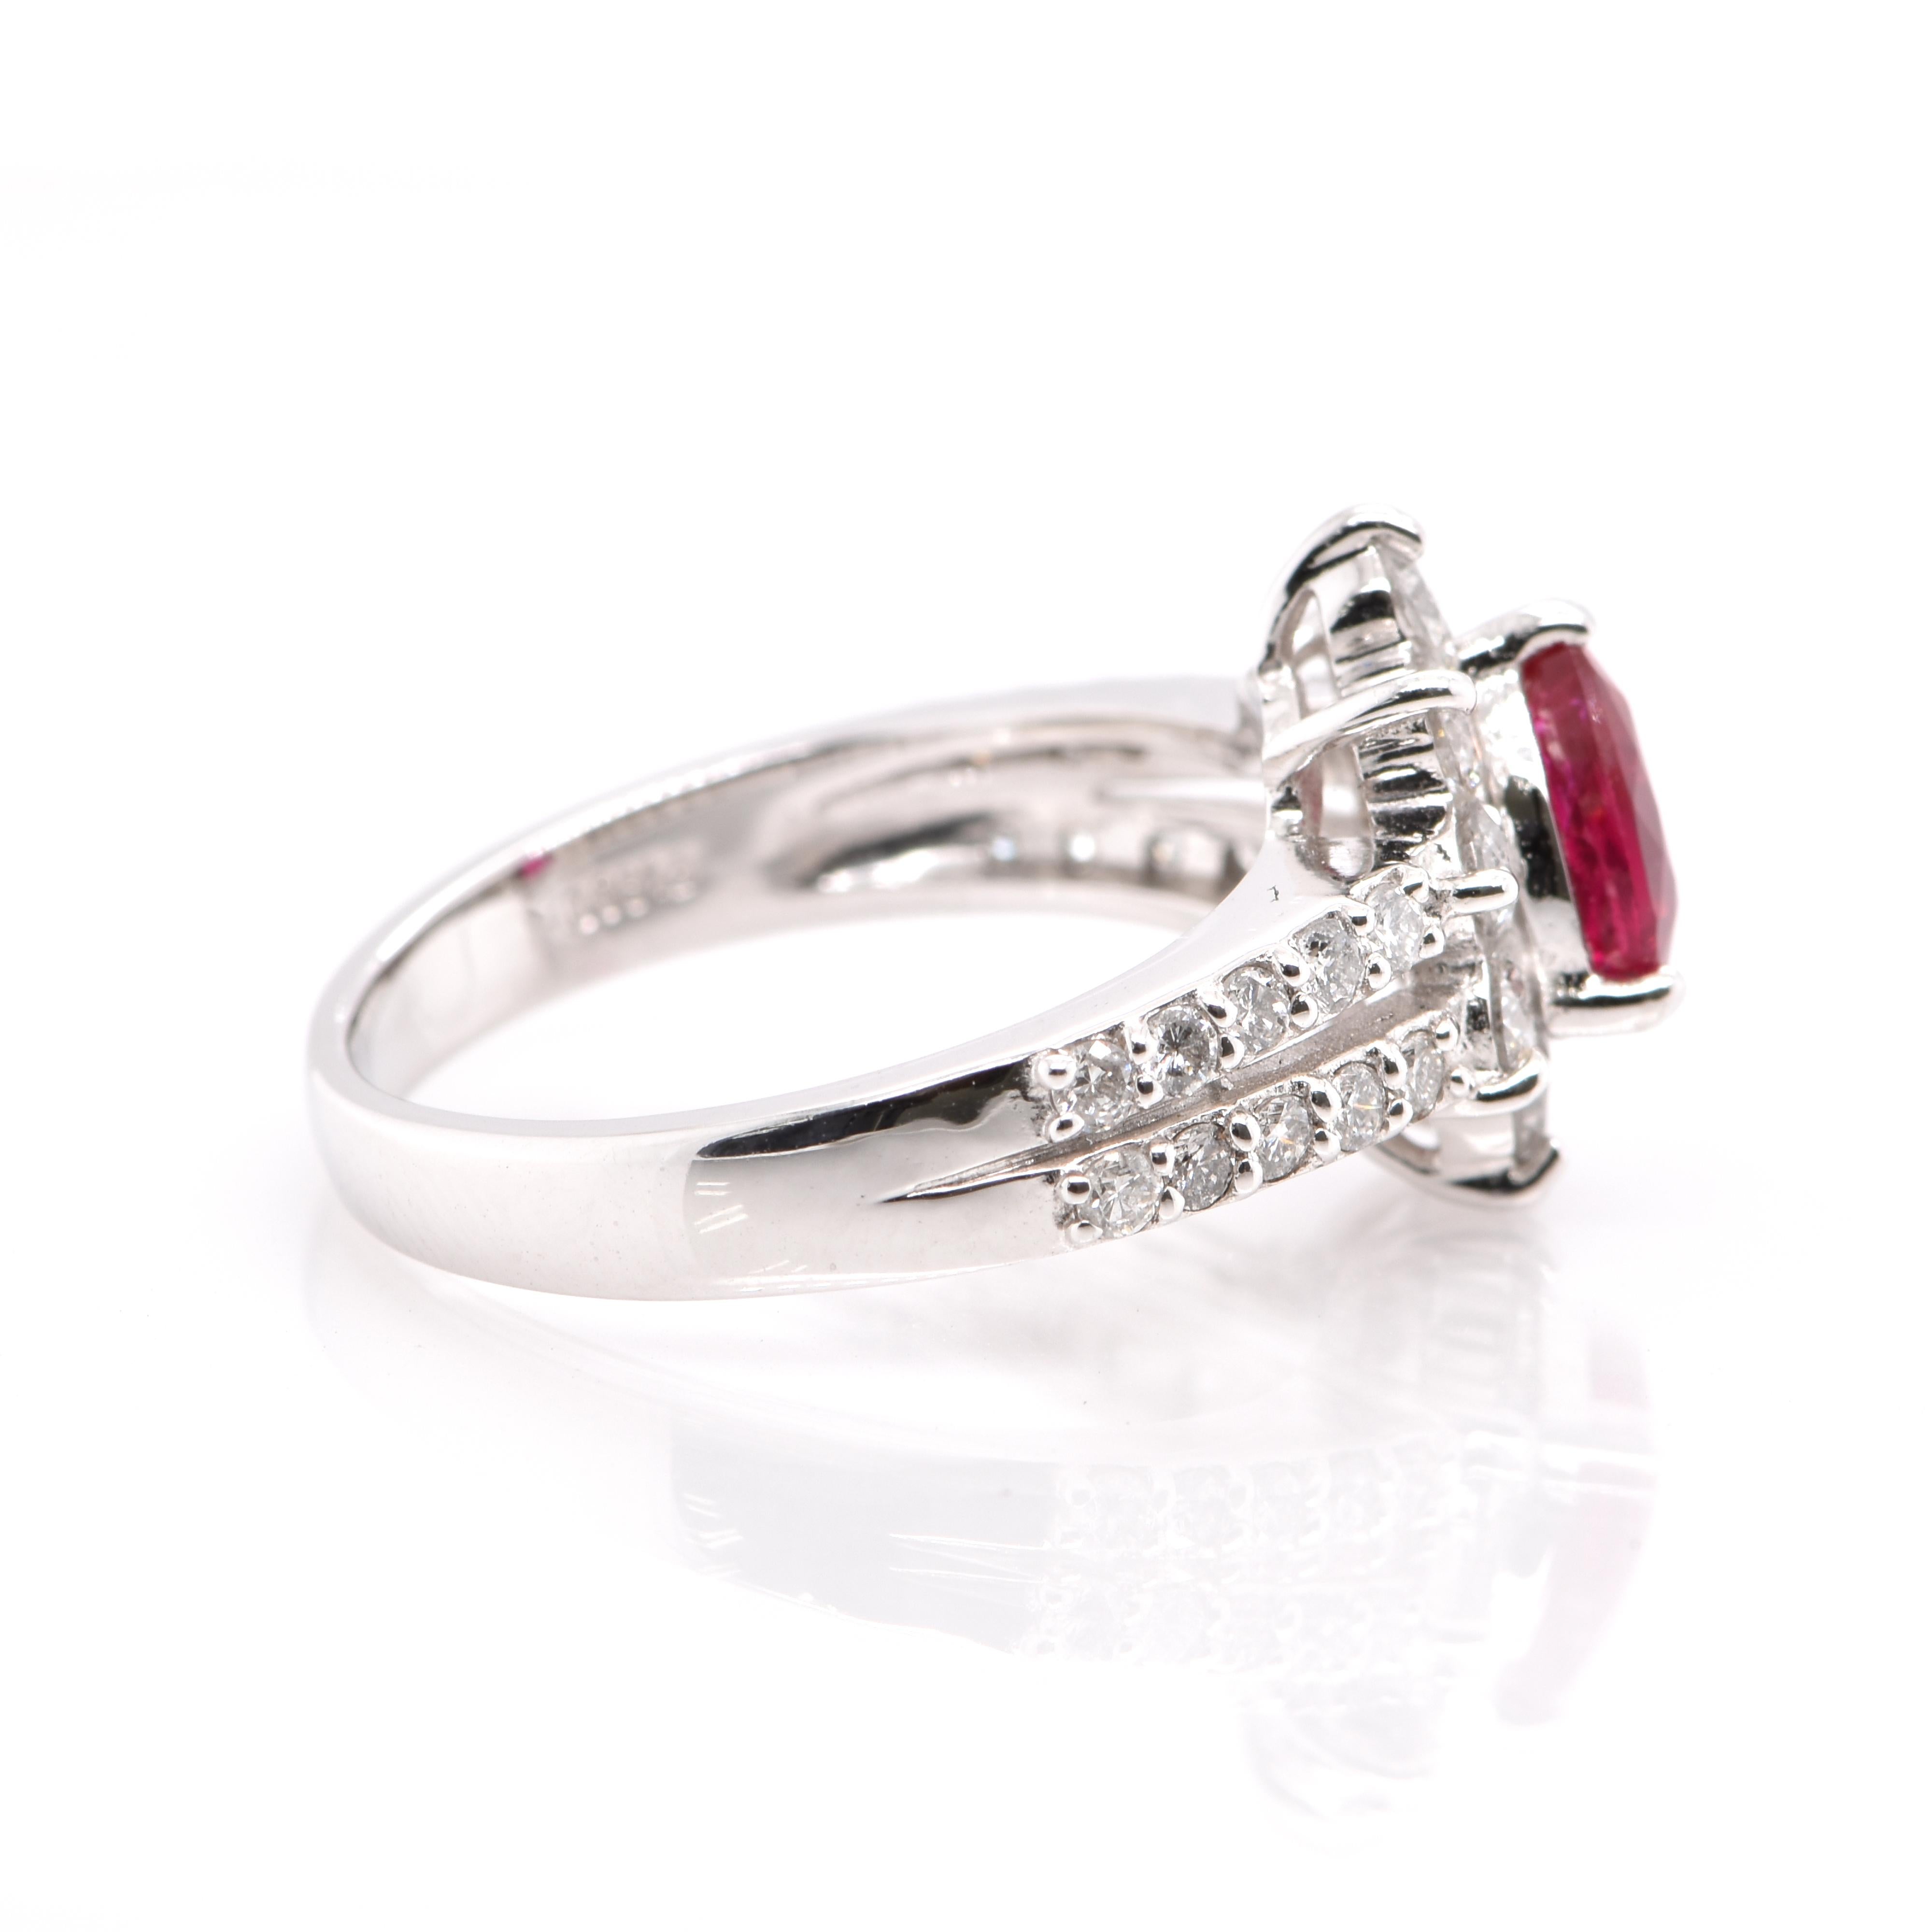 Modern GIA Certified 1.02 Carat Natural Untreated 'No Heat' Ruby Ring Set in Platinum For Sale